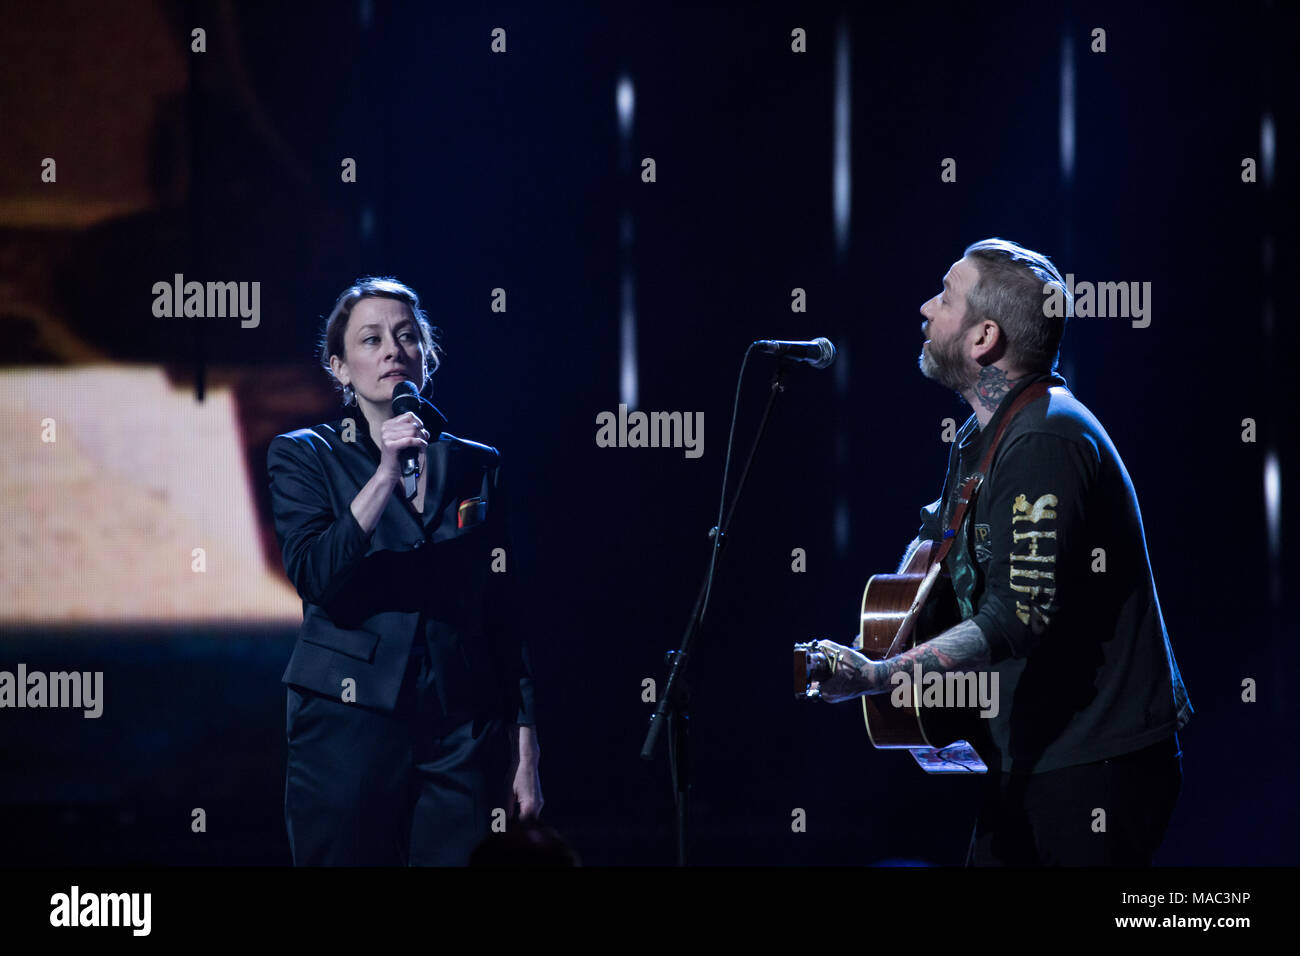 Vancouver, CANADA. 26th March, 2018. Kevin Hearn, Sarah Harmer and Dallas Green perform a tribute to the late Gord Downie at the 2018 Juno Awards. Stock Photo